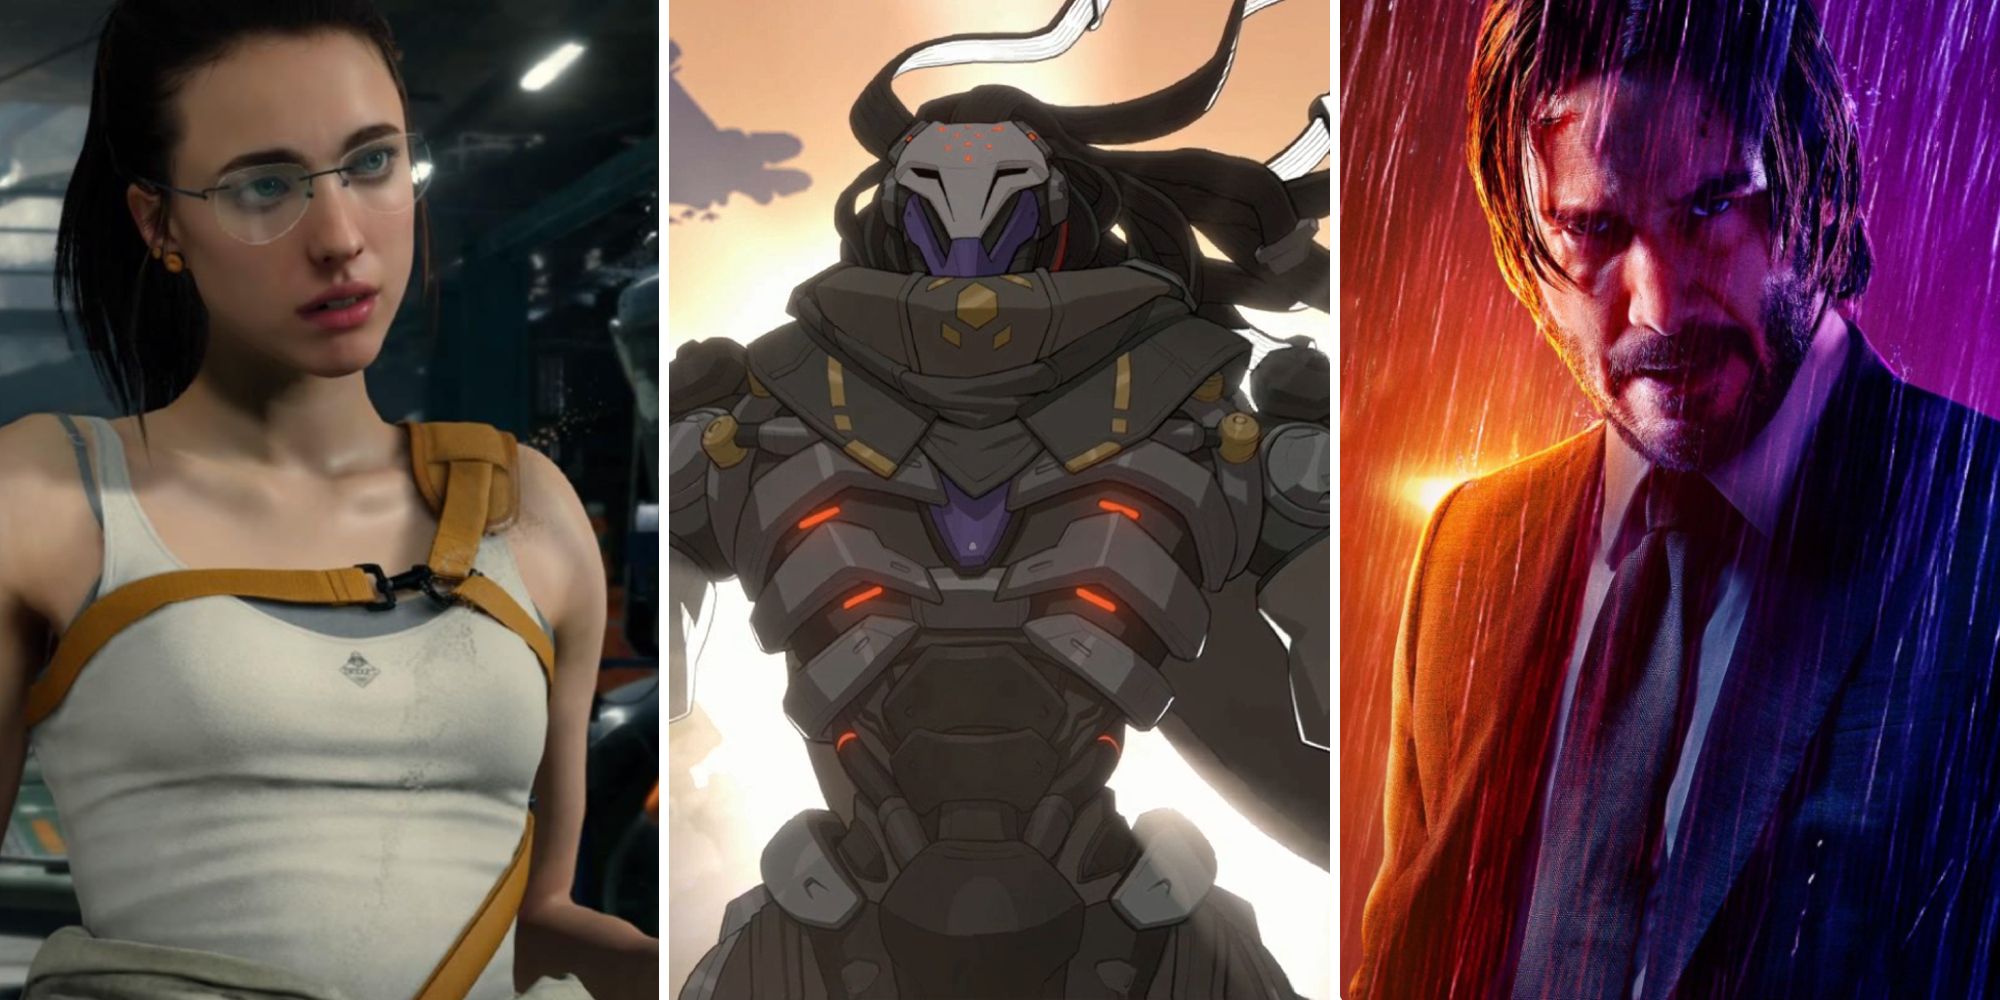 Mama from Death Stranding, Ramattra from Overwatch 2, and John Wick